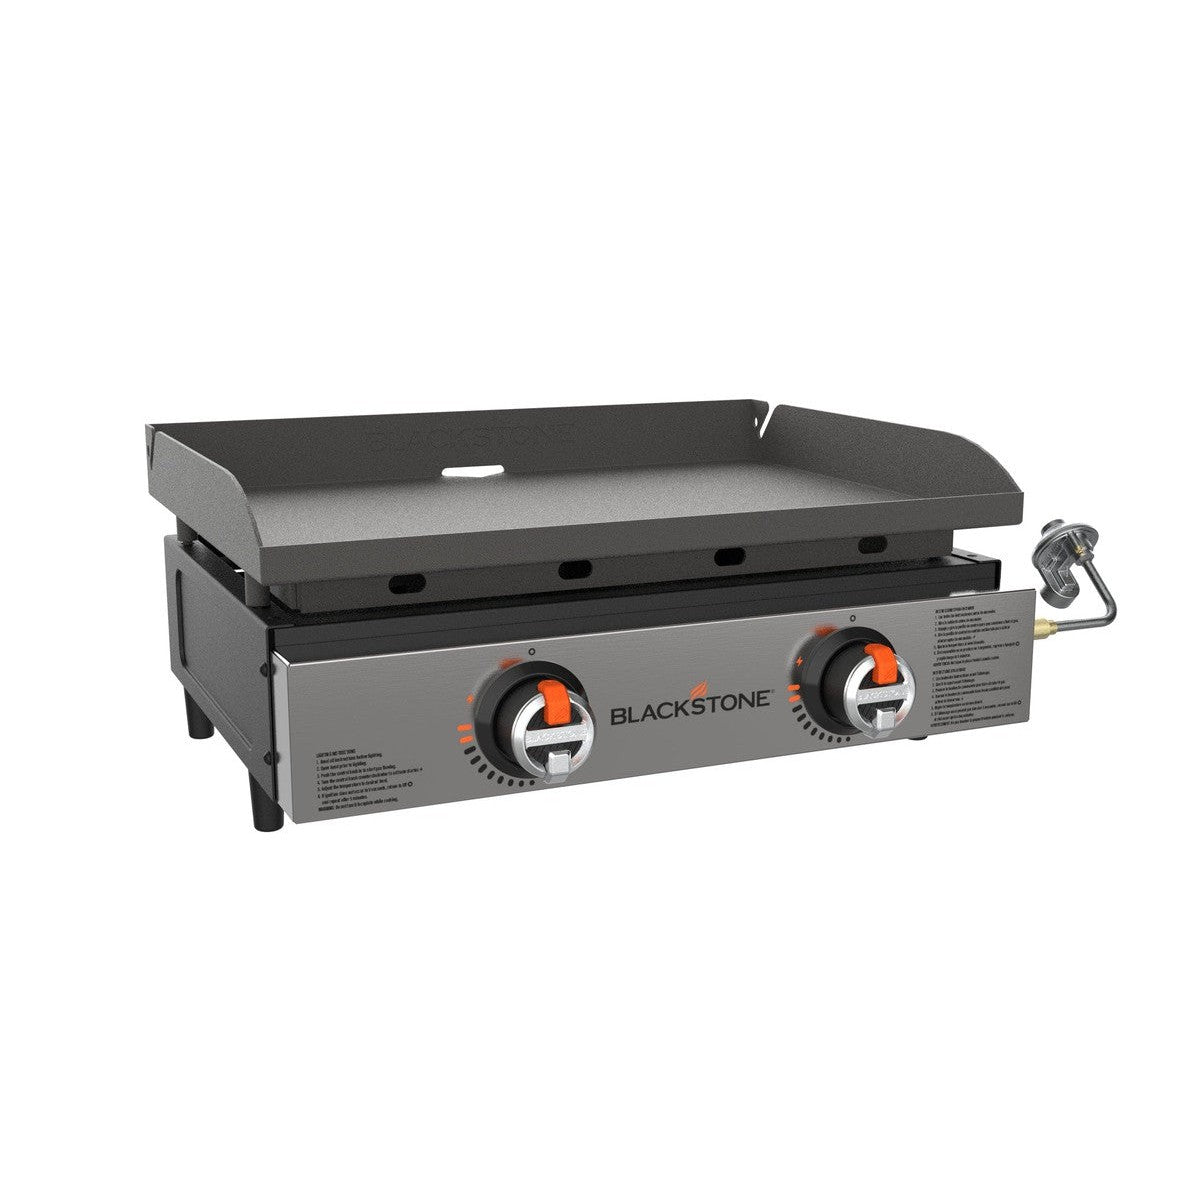 Blackstone Oversized - Not Qualified for Free Shipping Blackstone Original 22" Omnivore Griddle with SS Front Panel #2203